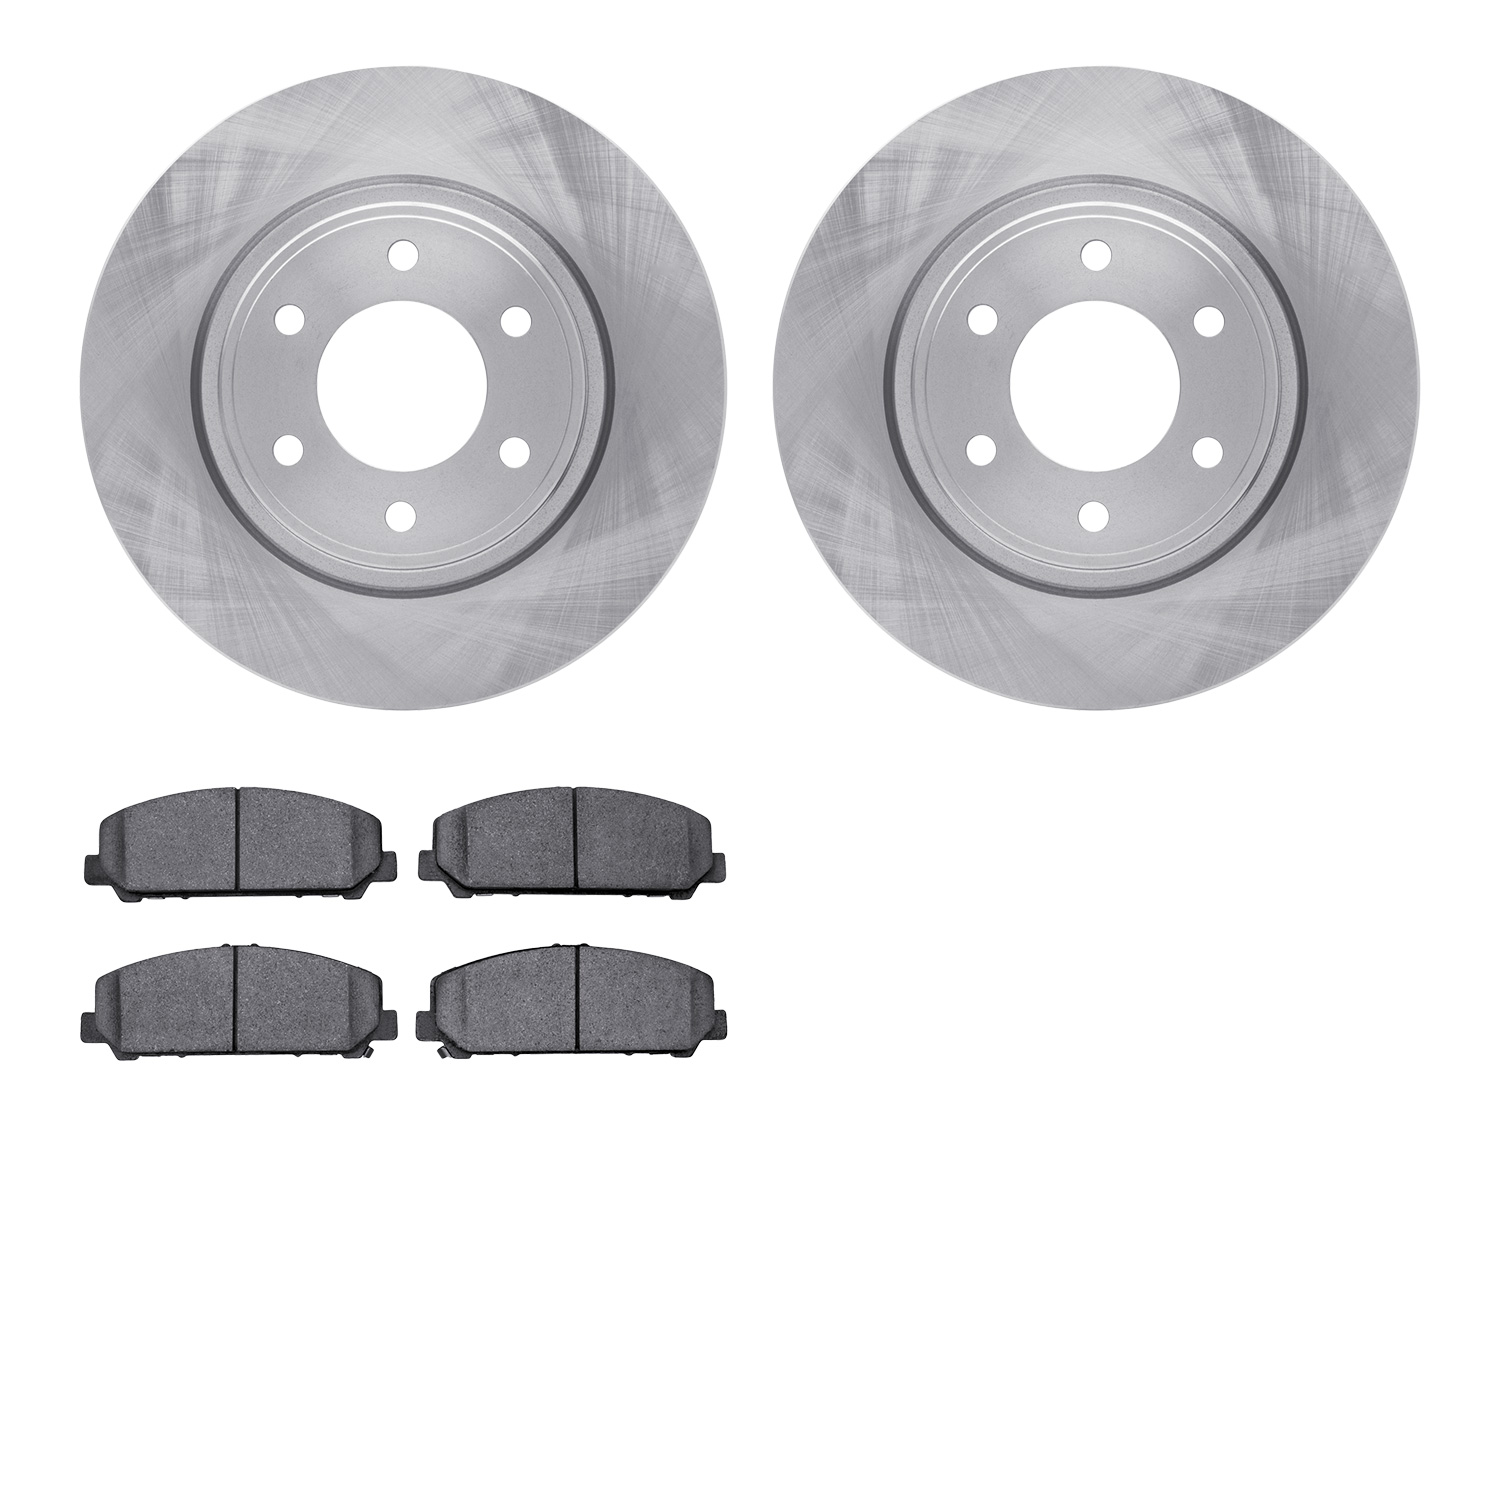 6402-68001 Brake Rotors with Ultimate-Duty Brake Pads, Fits Select Infiniti/Nissan, Position: Front